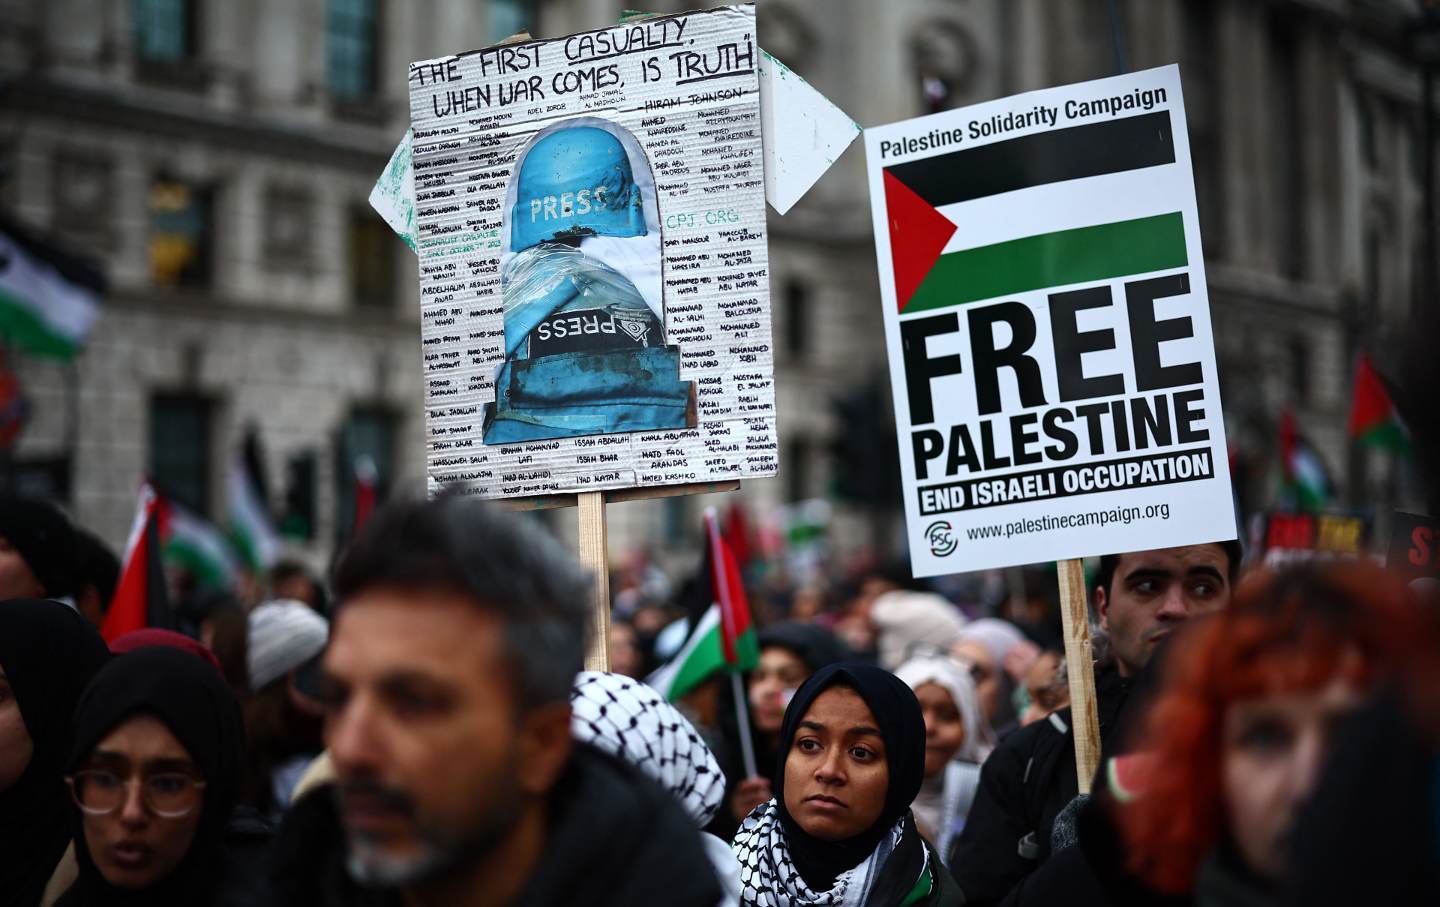 Pro-Palestinian activists and supporters carry placards, including a sign featuring names of journalists hurt during the latest conflict, during a National March for Palestine in central London on January 13, 2024.